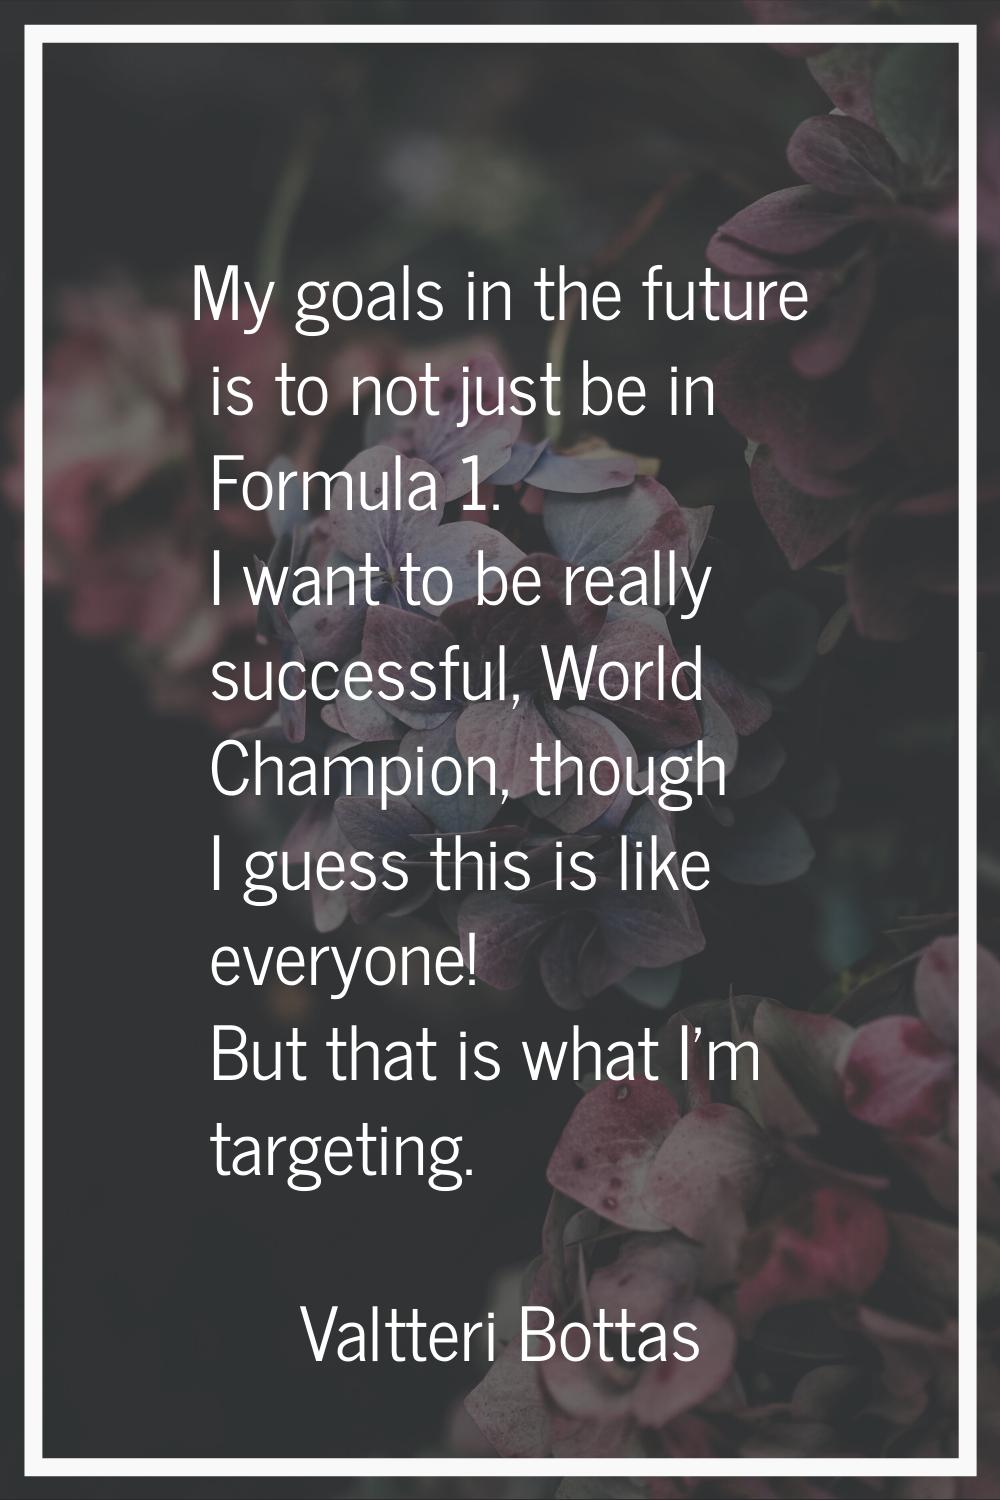 My goals in the future is to not just be in Formula 1. I want to be really successful, World Champi